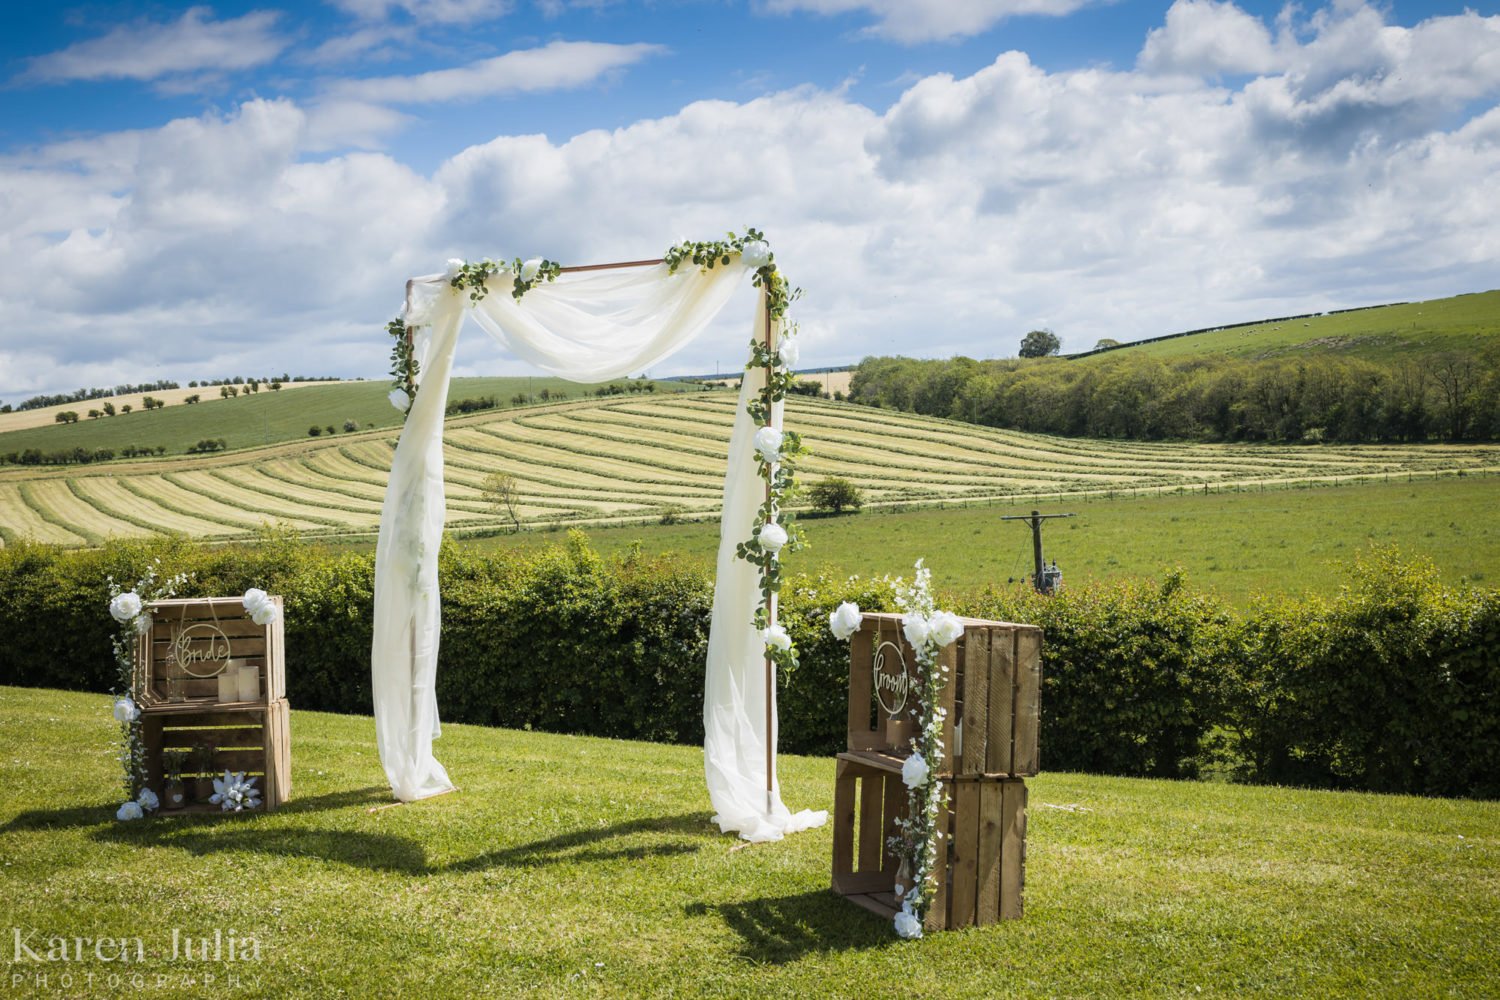 Barwheys set up for an outdoor wedding ceremony